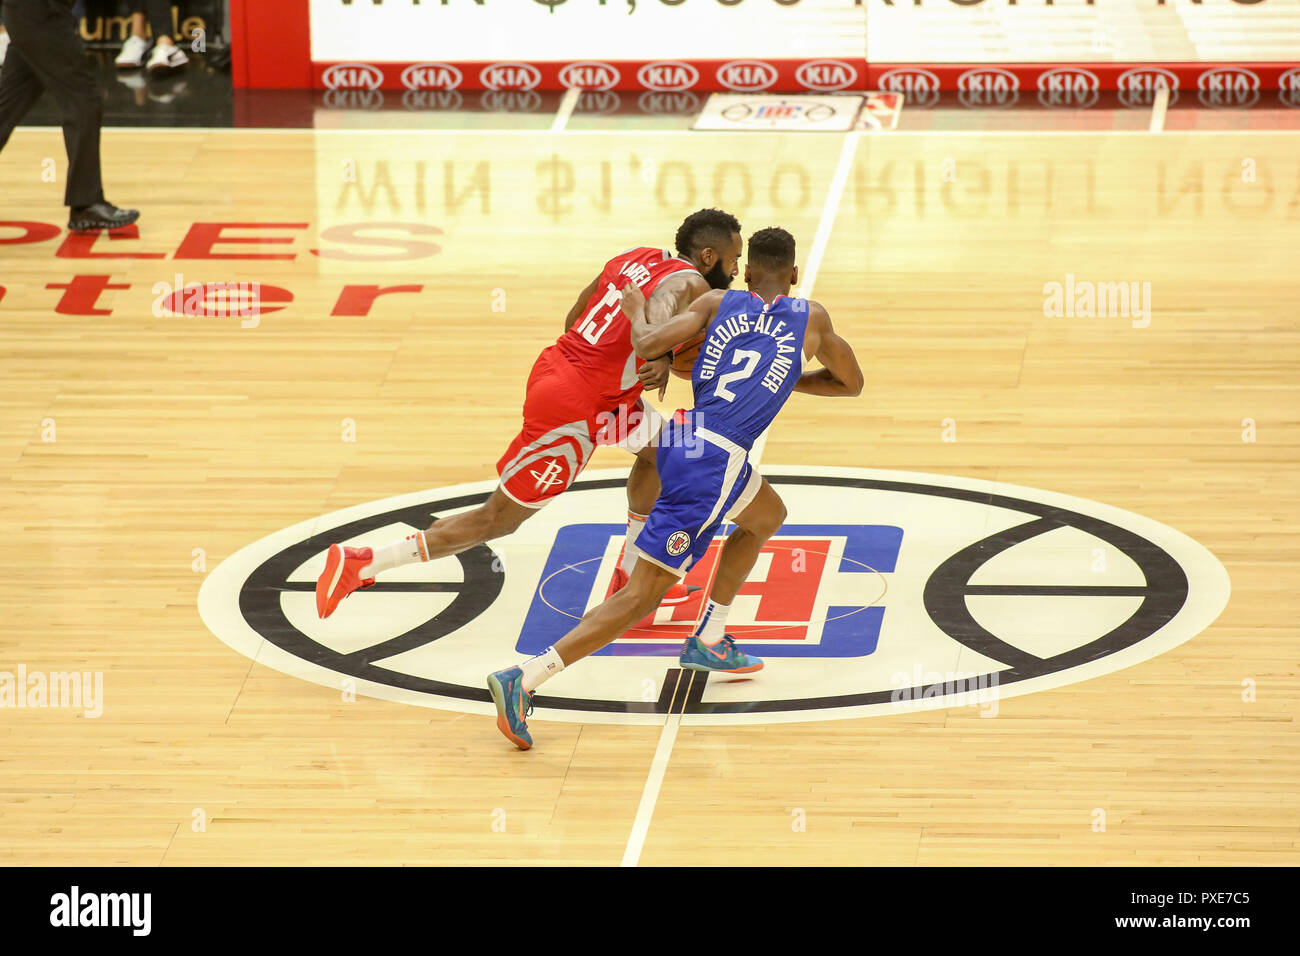 Los Angeles, CA, USA. 21st Oct, 2018. Houston Rockets guard James Harden #13 going pass LA Clippers logo during the Houston Rockets vs Los Angeles Clippers at Staples Center on October 21, 2018. (Photo by Jevone Moore) Credit: csm/Alamy Live News Stock Photo